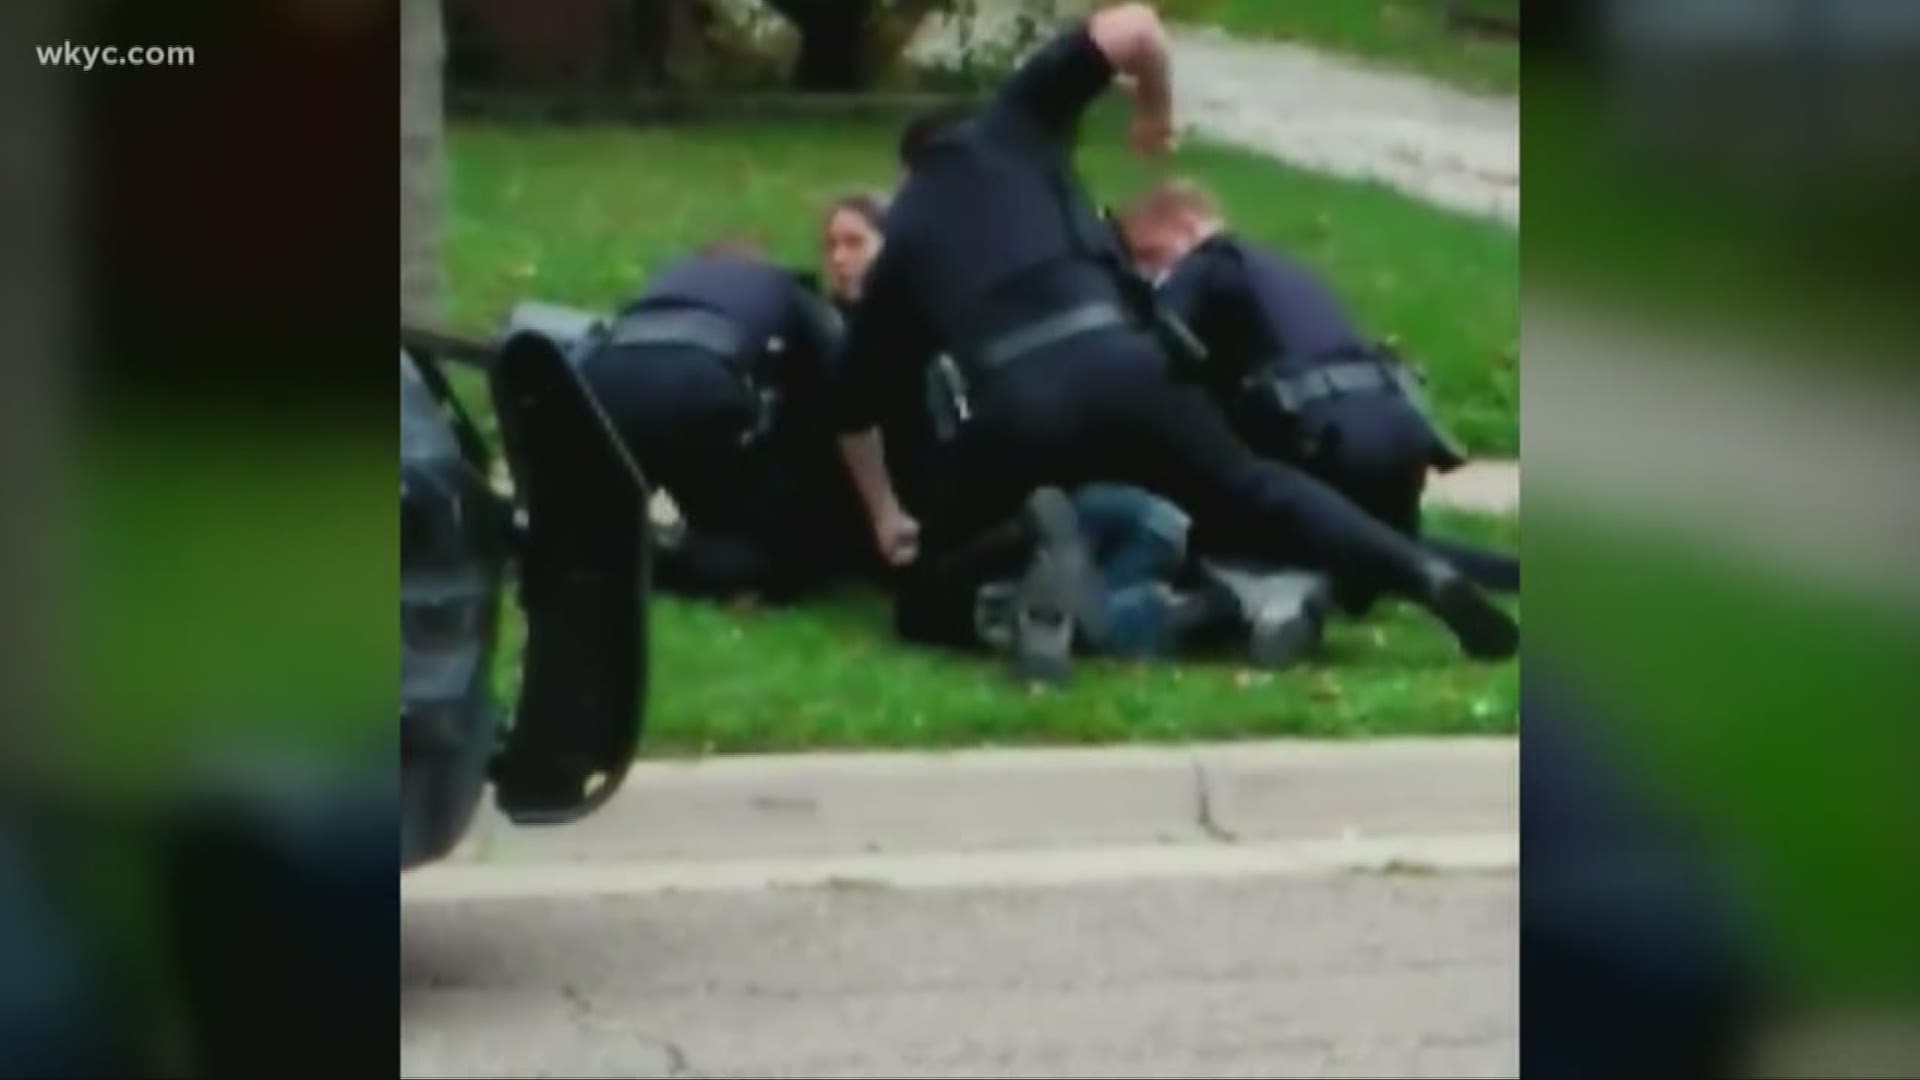 Did Akron officers go too far in aggressive arrest on viral video?